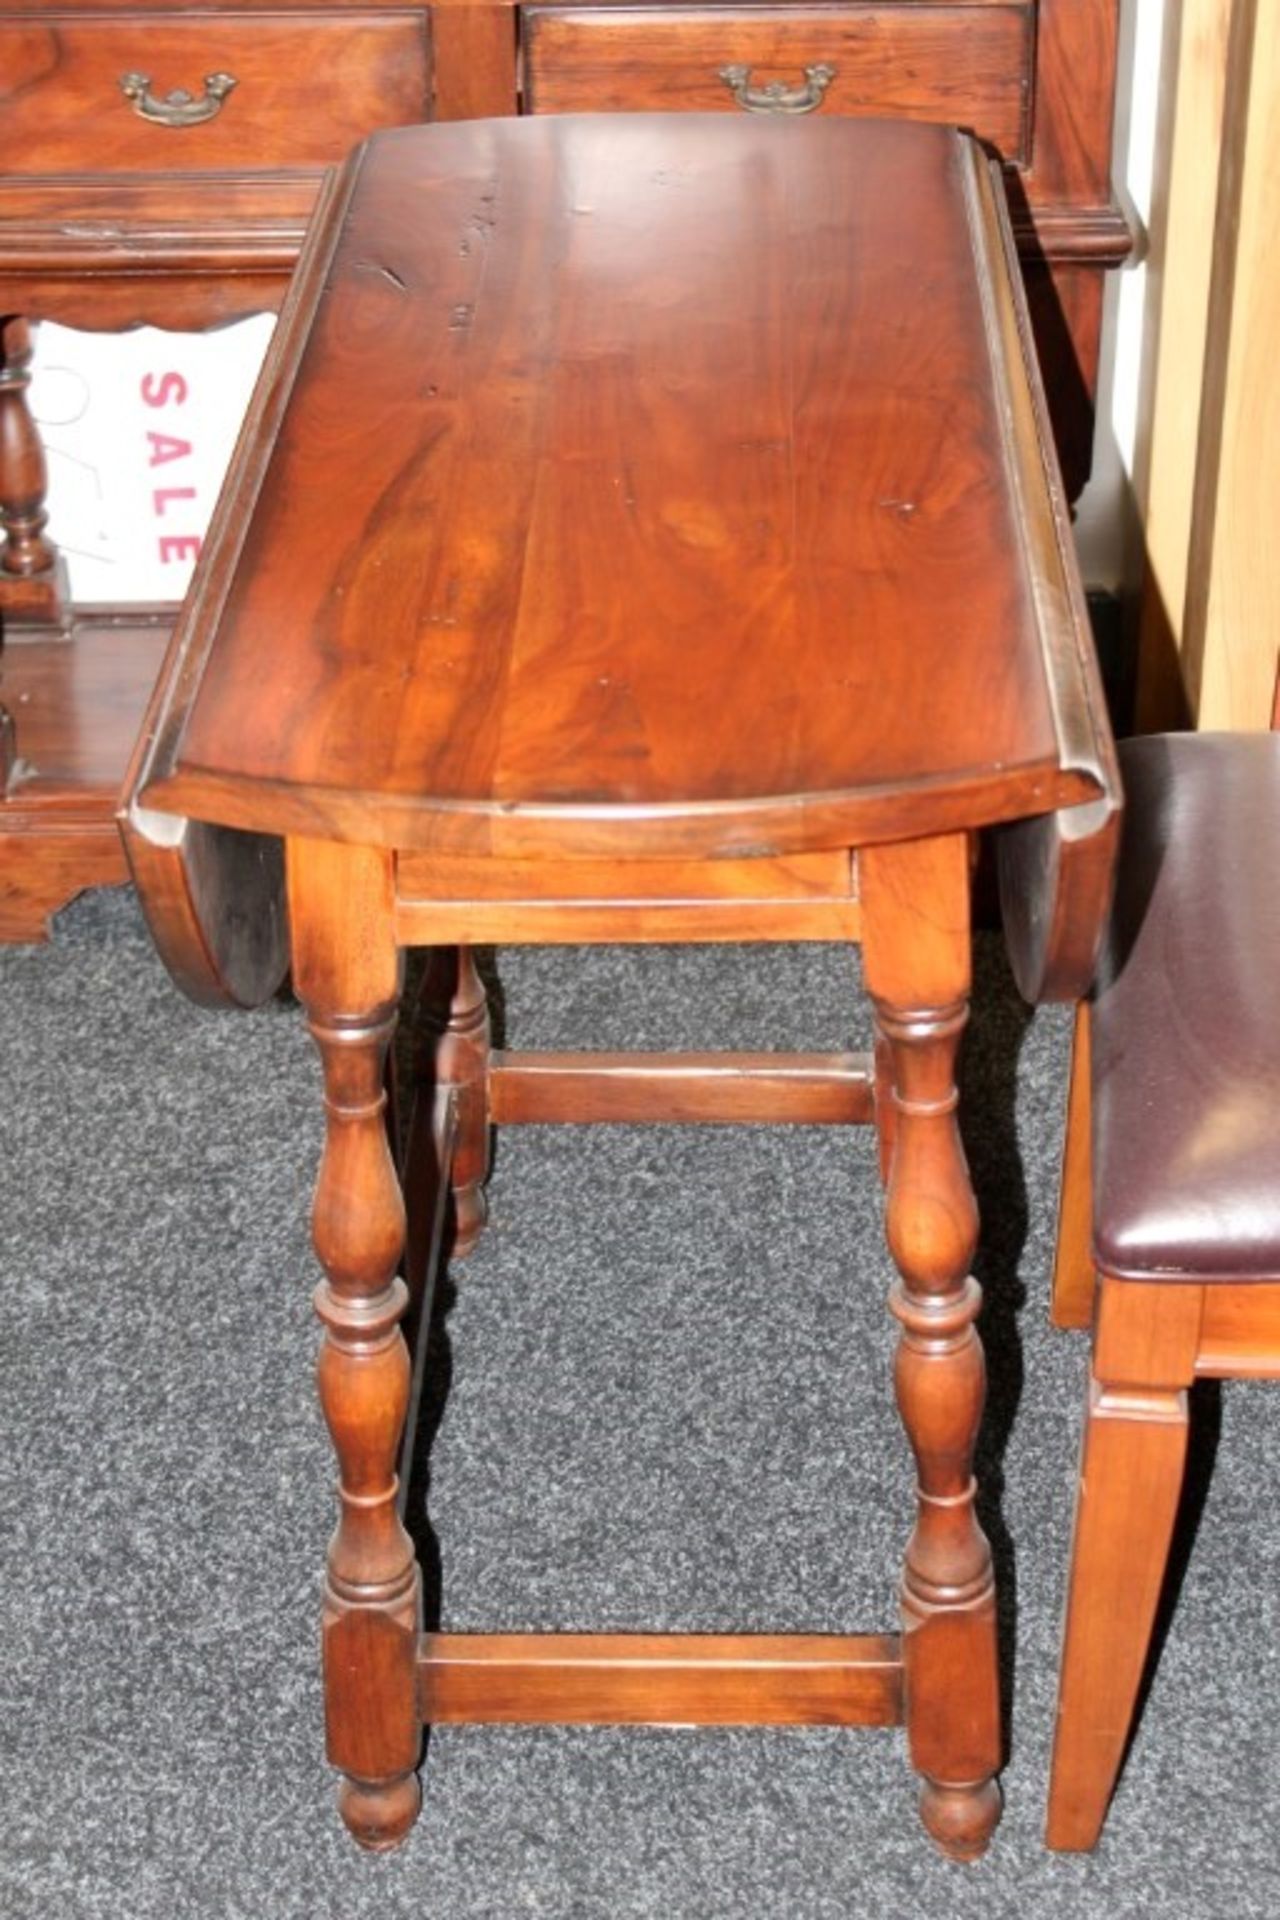 1 x Mark Webster "Burlington" Solid Wood Gate Leg Extending Table With 2-Drawers + 2-Folds - Diamete - Image 9 of 14